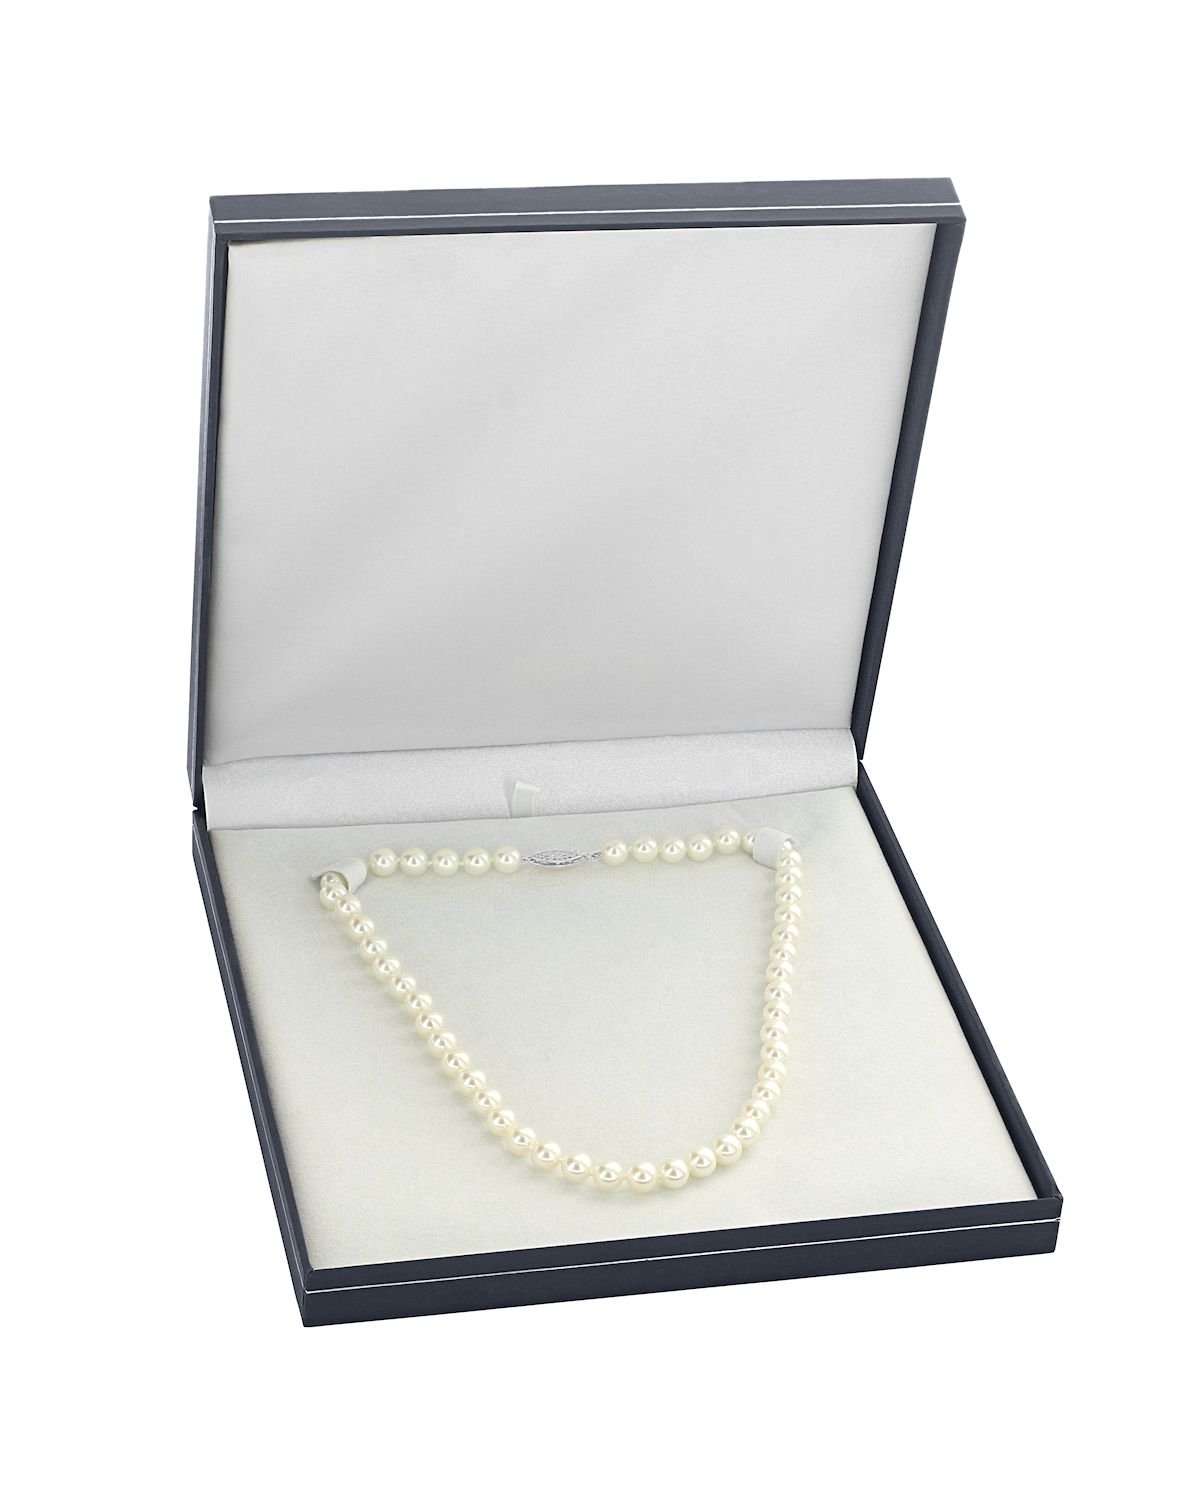 5.0-7.0mm Japanese Akoya White Graduated Pearl Necklace - Secondary Image